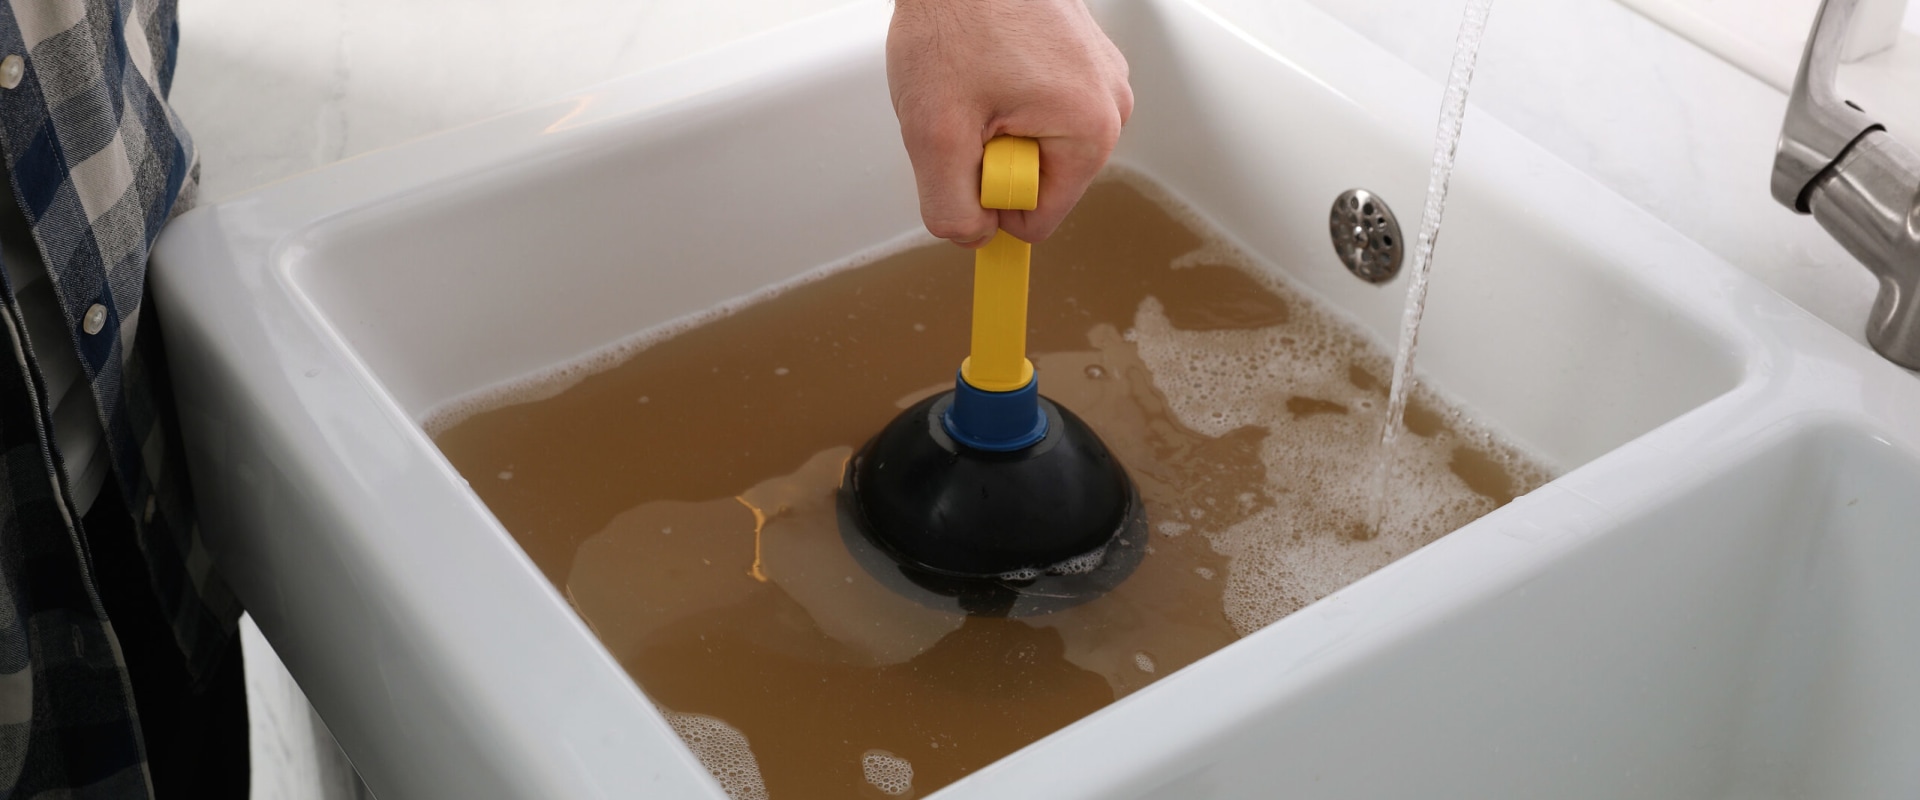 Unclogging a Drain: Tips and Techniques for Home Maintenance